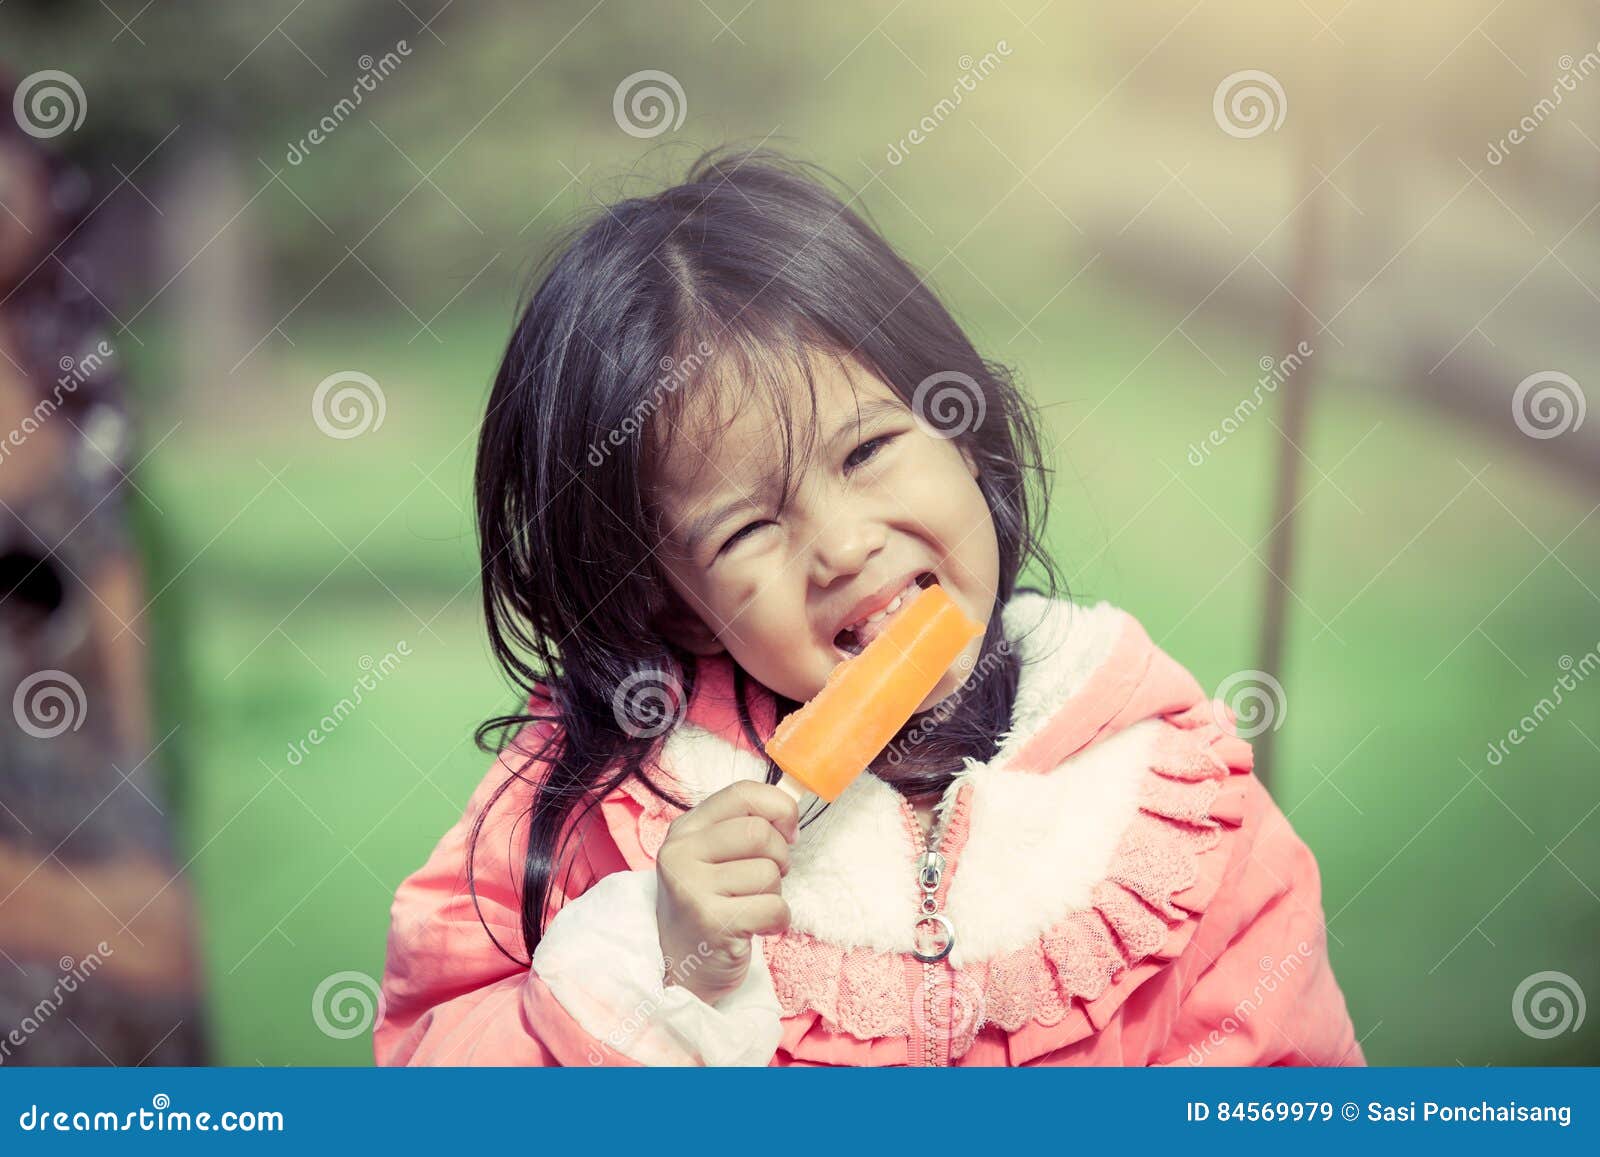 Cute Asian Little Girl Is Eating Icecream In The Park Stock Image